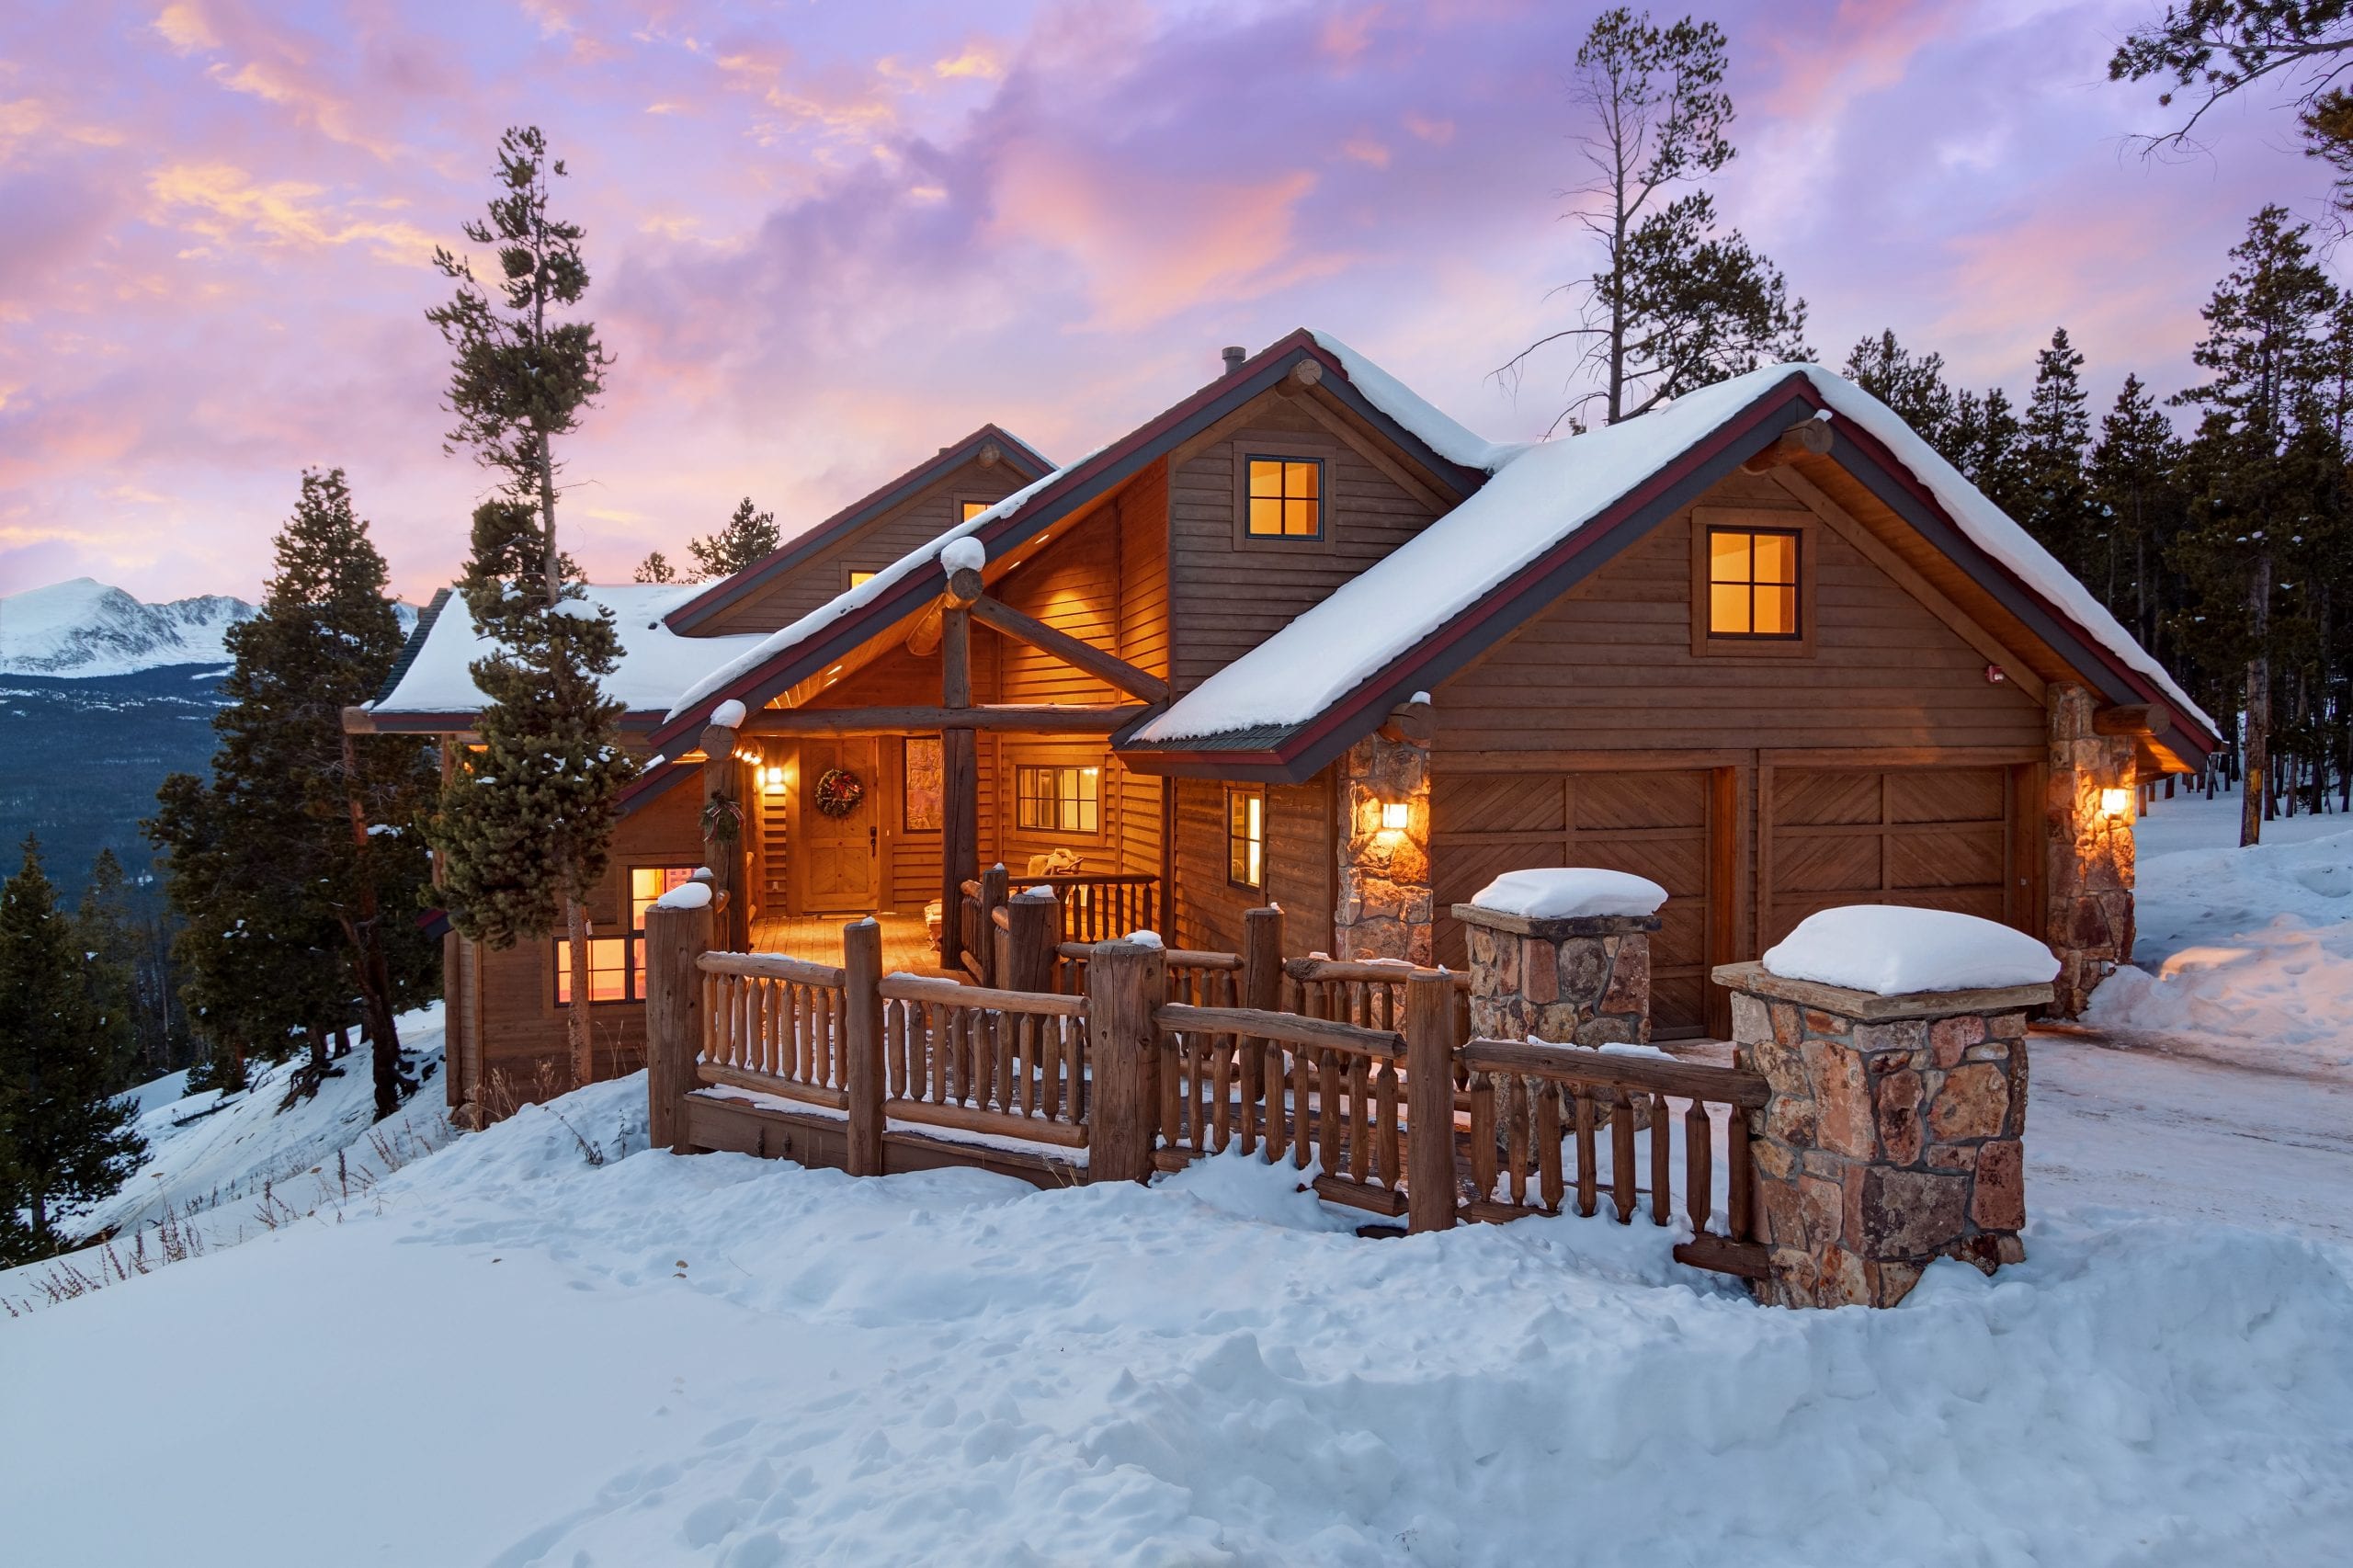 Our Vacation Rental Management & Maintenance Performance in Summit County, Colorado